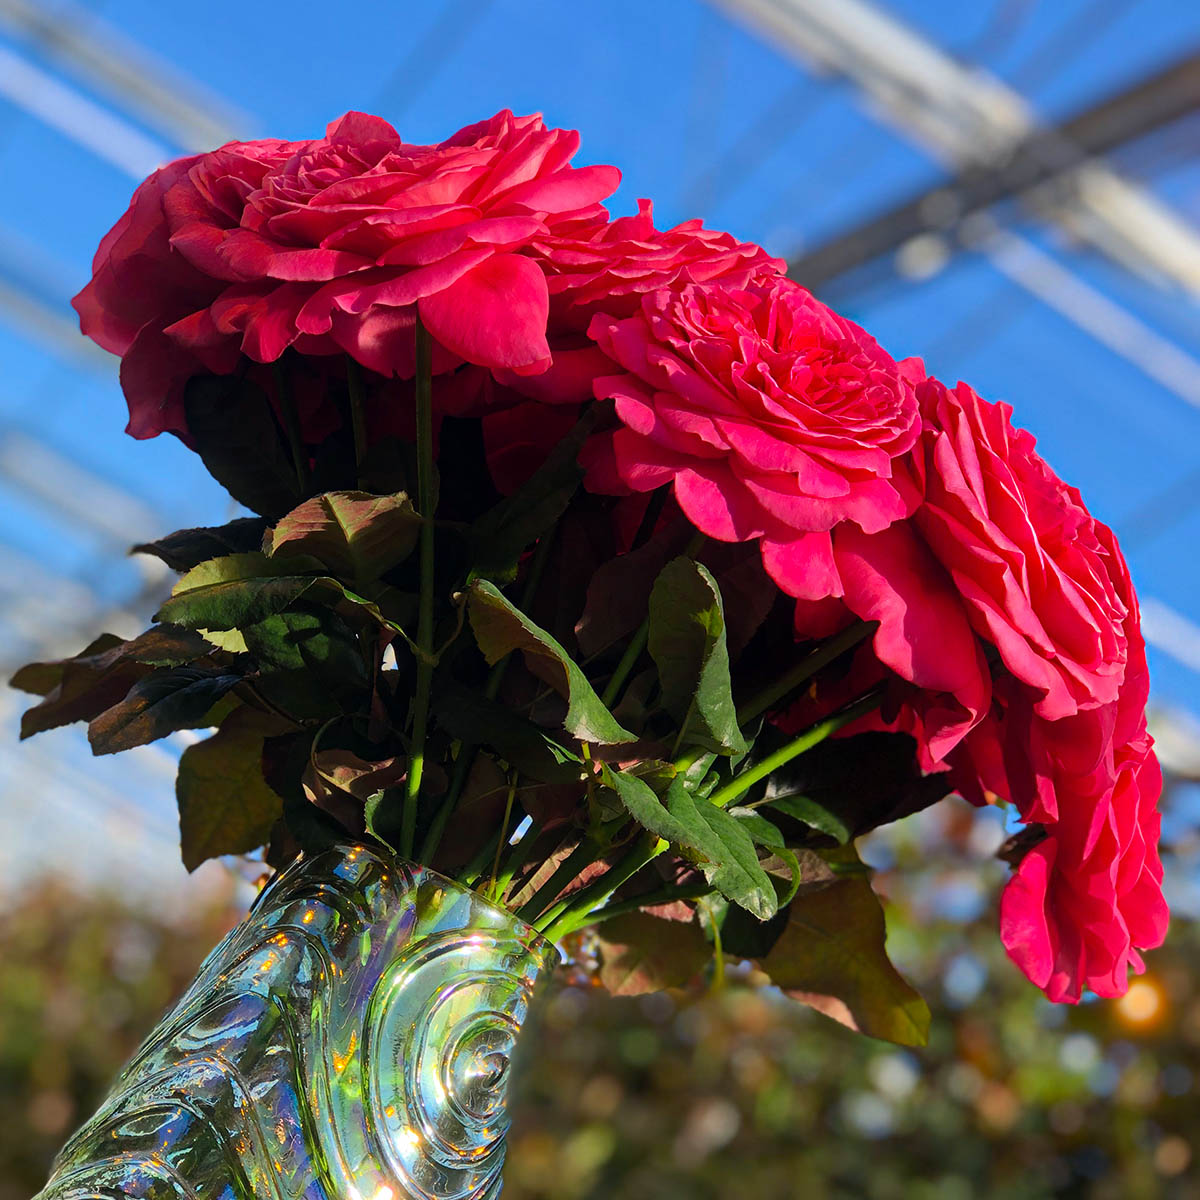 Cold Greenhouse Roses by Van der Hulst feature on Thursd